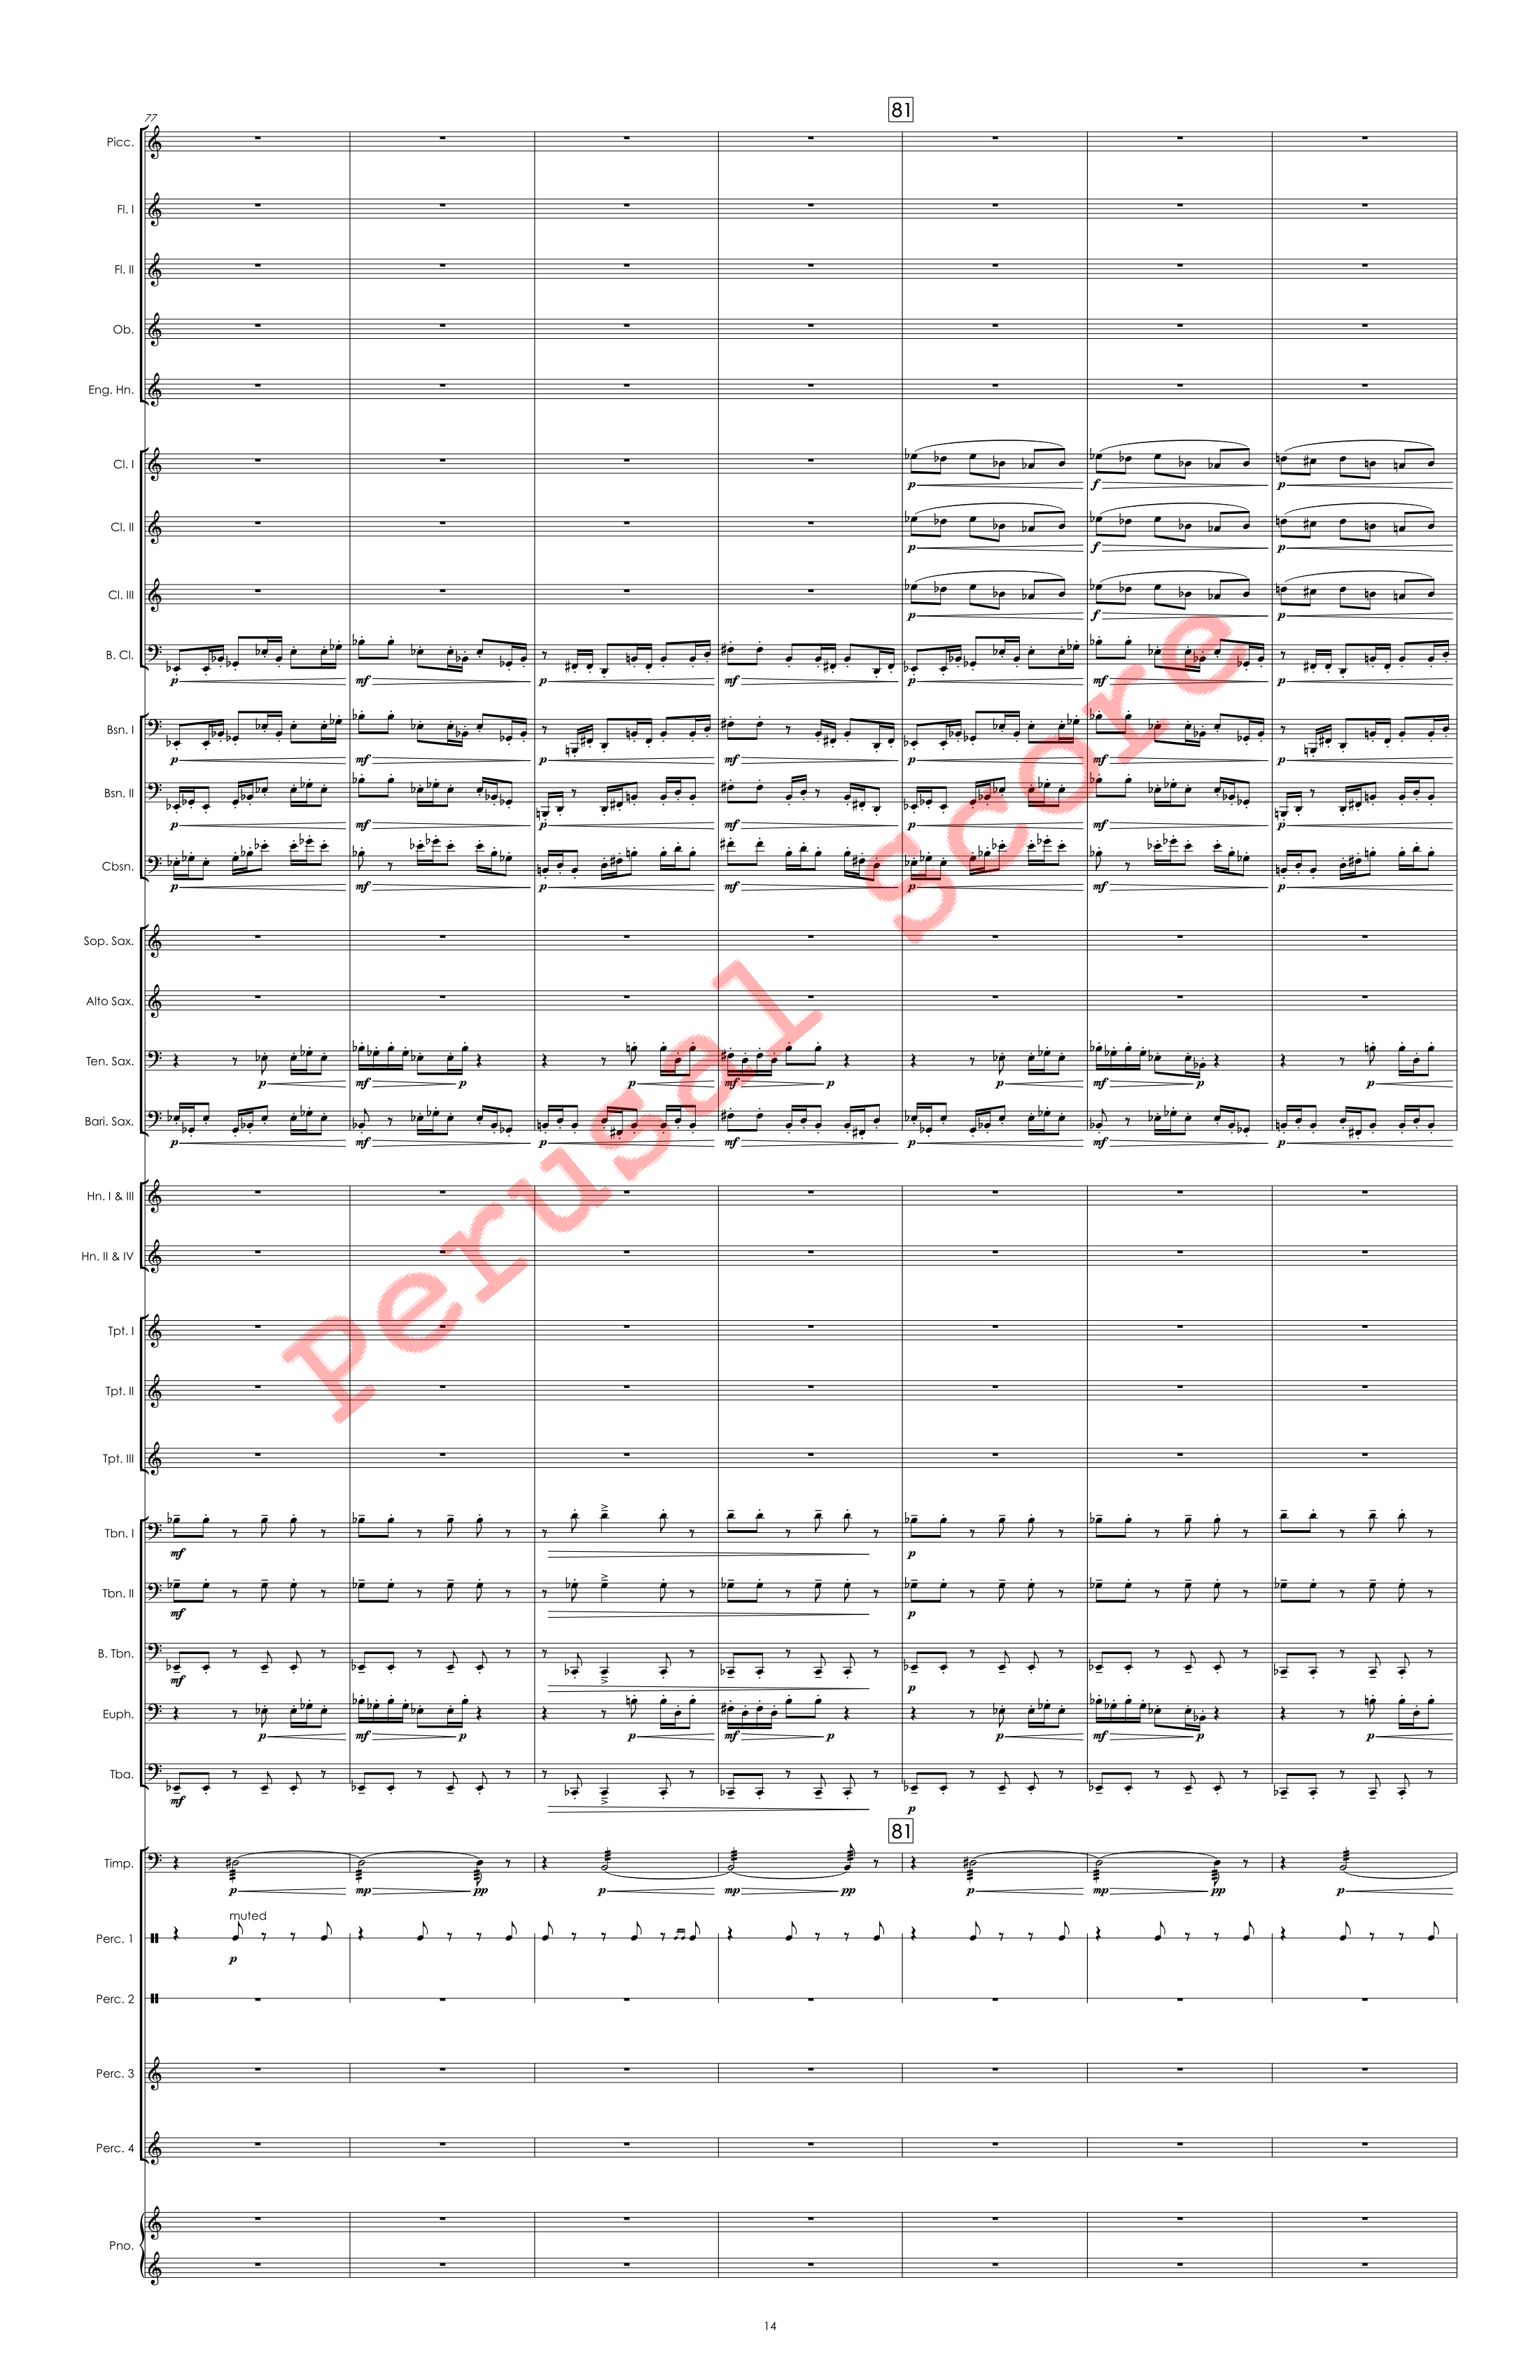 Canadian Folk Song - FINISHED 4.18.23- Full Score perusal score-14.png